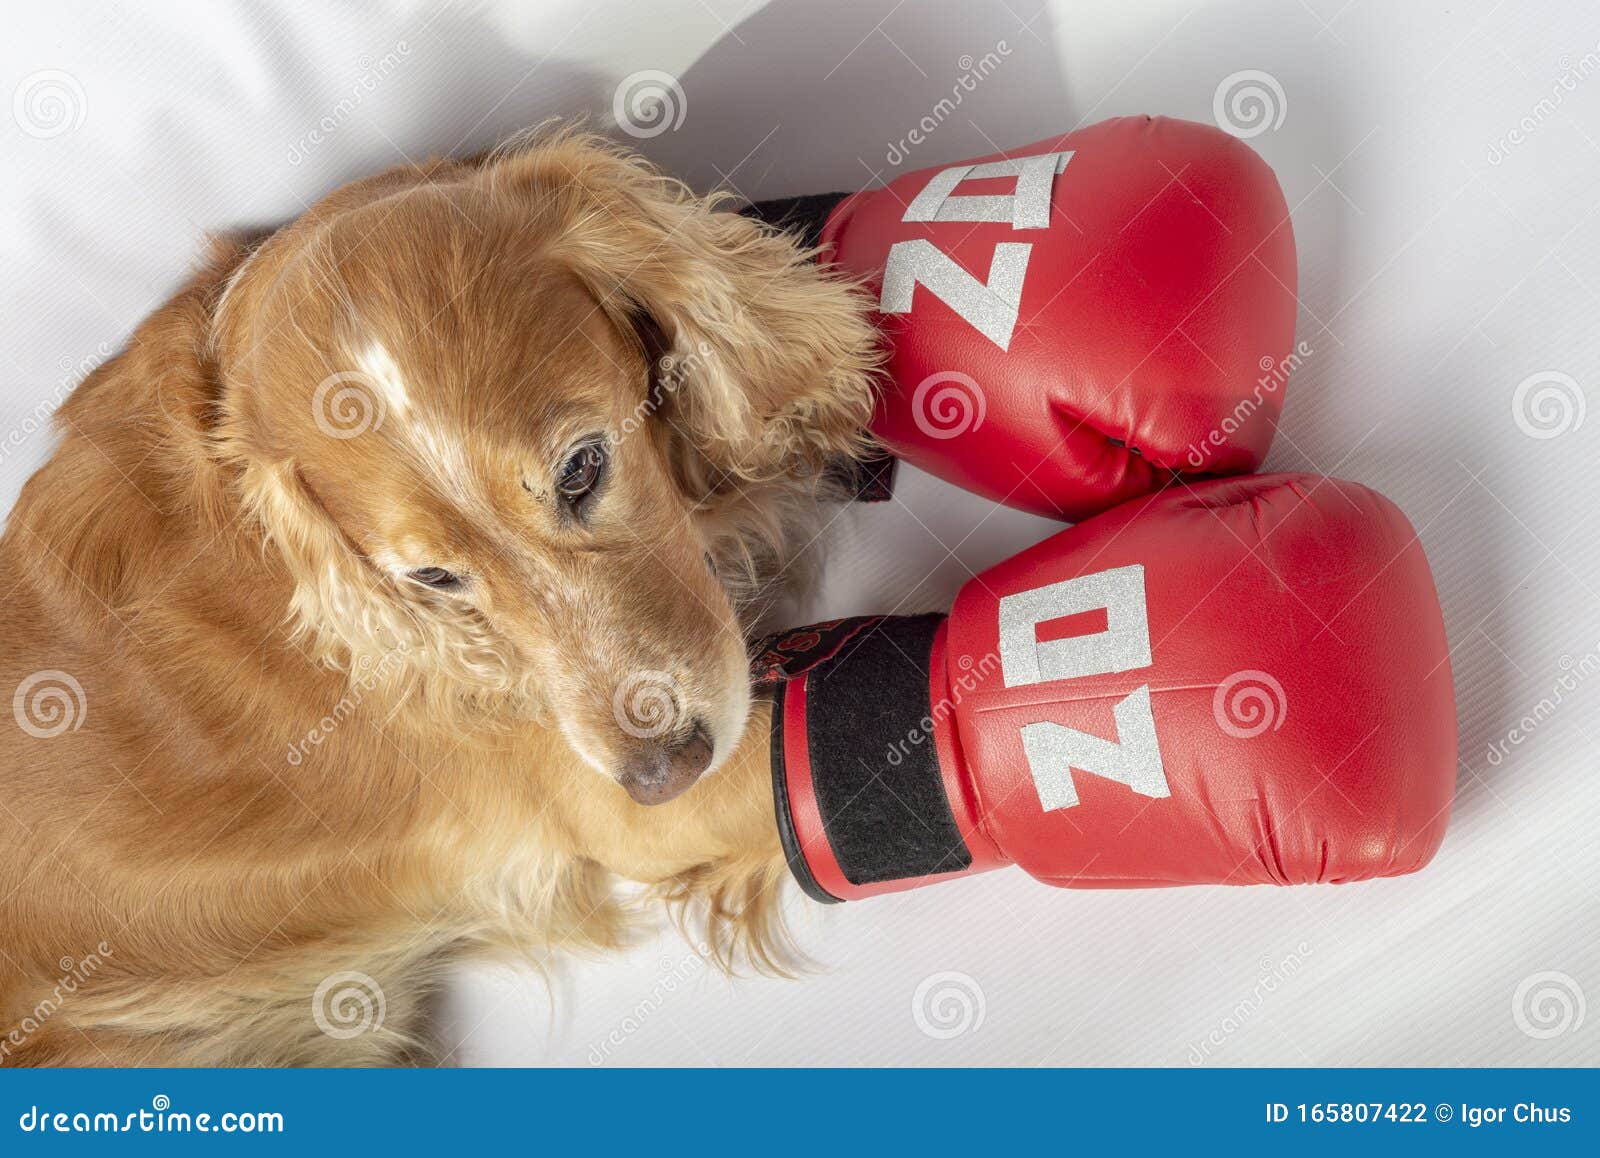 Boxing Pug Stock Photos Free Royalty-Free Stock Photos From, 47% OFF